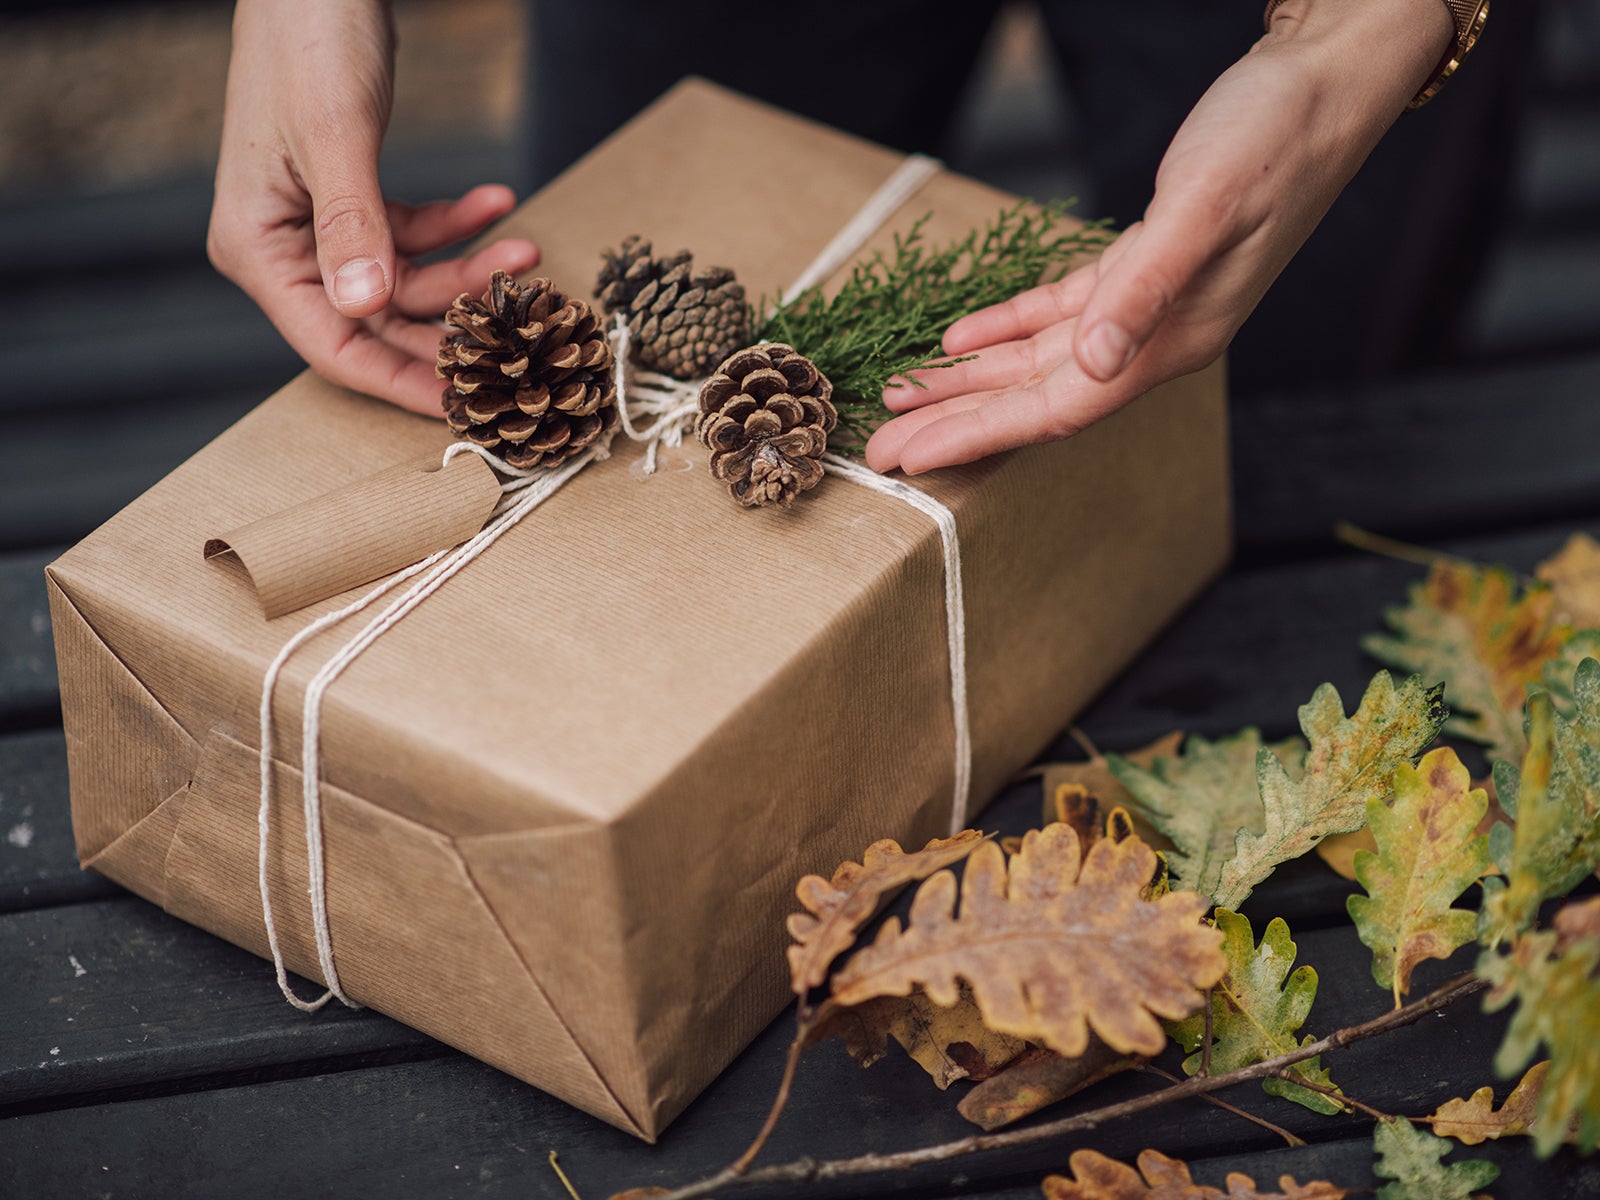 Decorated gift box. Natural colors, evergreen branches, and pine cones. Hands decorating gift box.